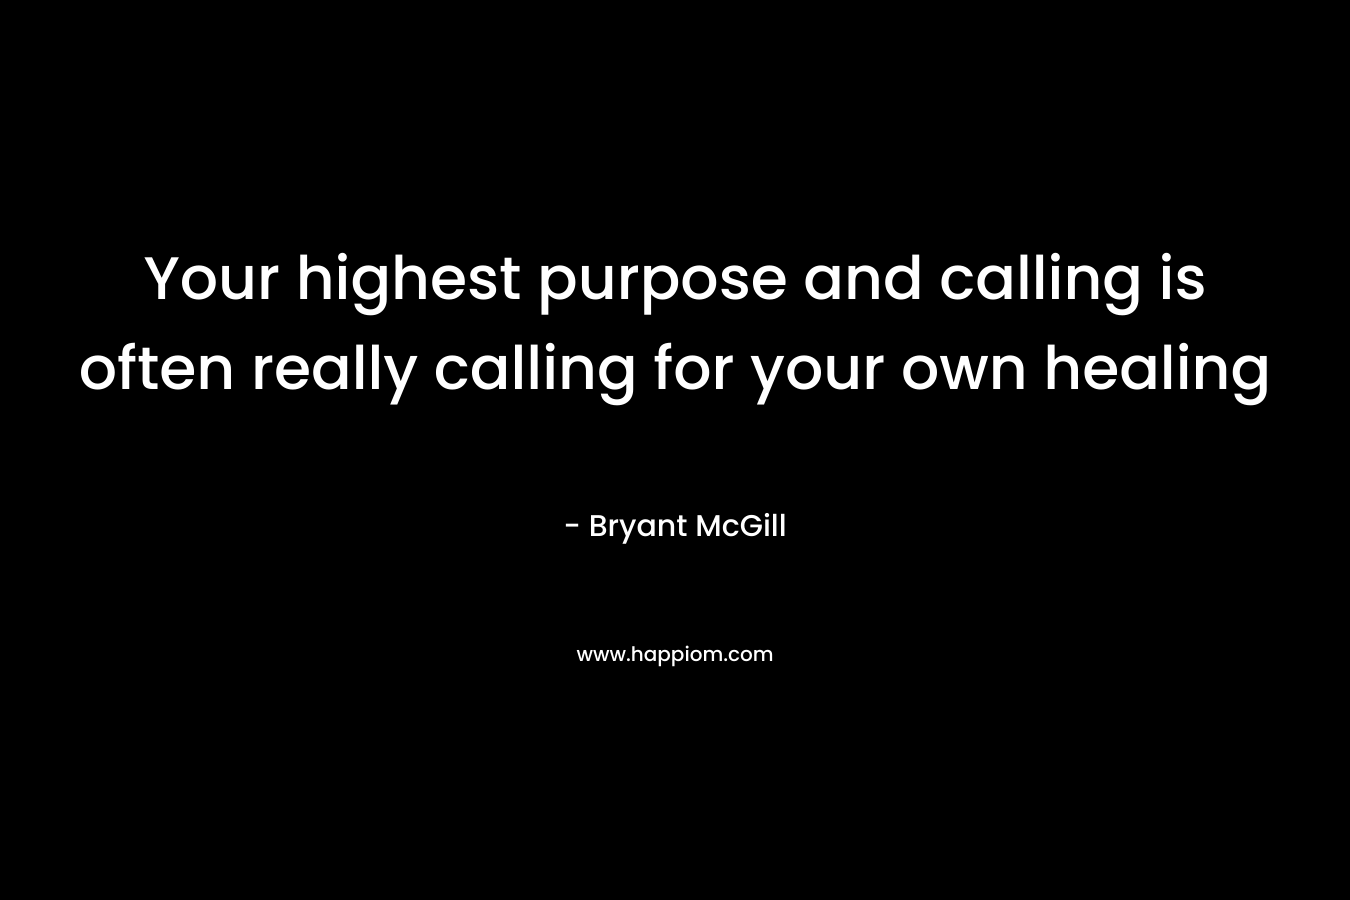 Your highest purpose and calling is often really calling for your own healing